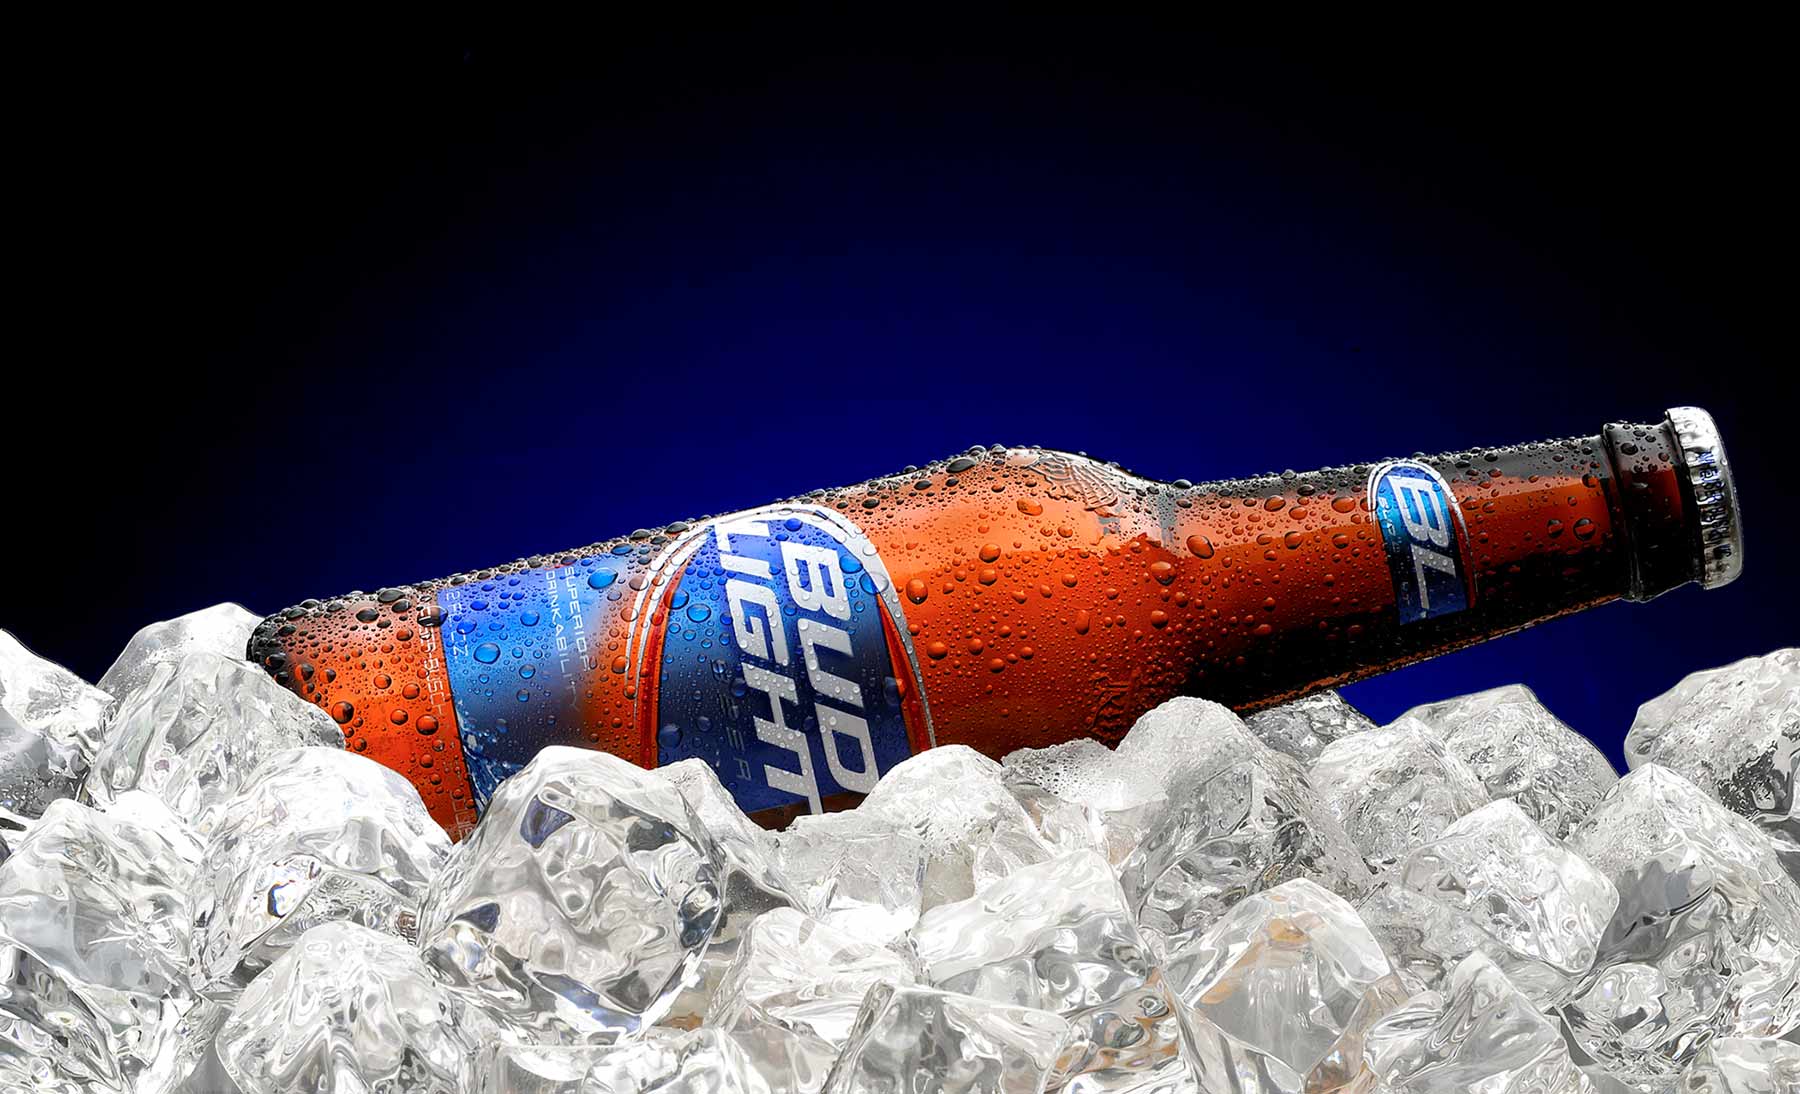 Bud Light Beer Can Photo  Free Drink Image On Unsplash   xn90absbknhbvgexnp1ai443